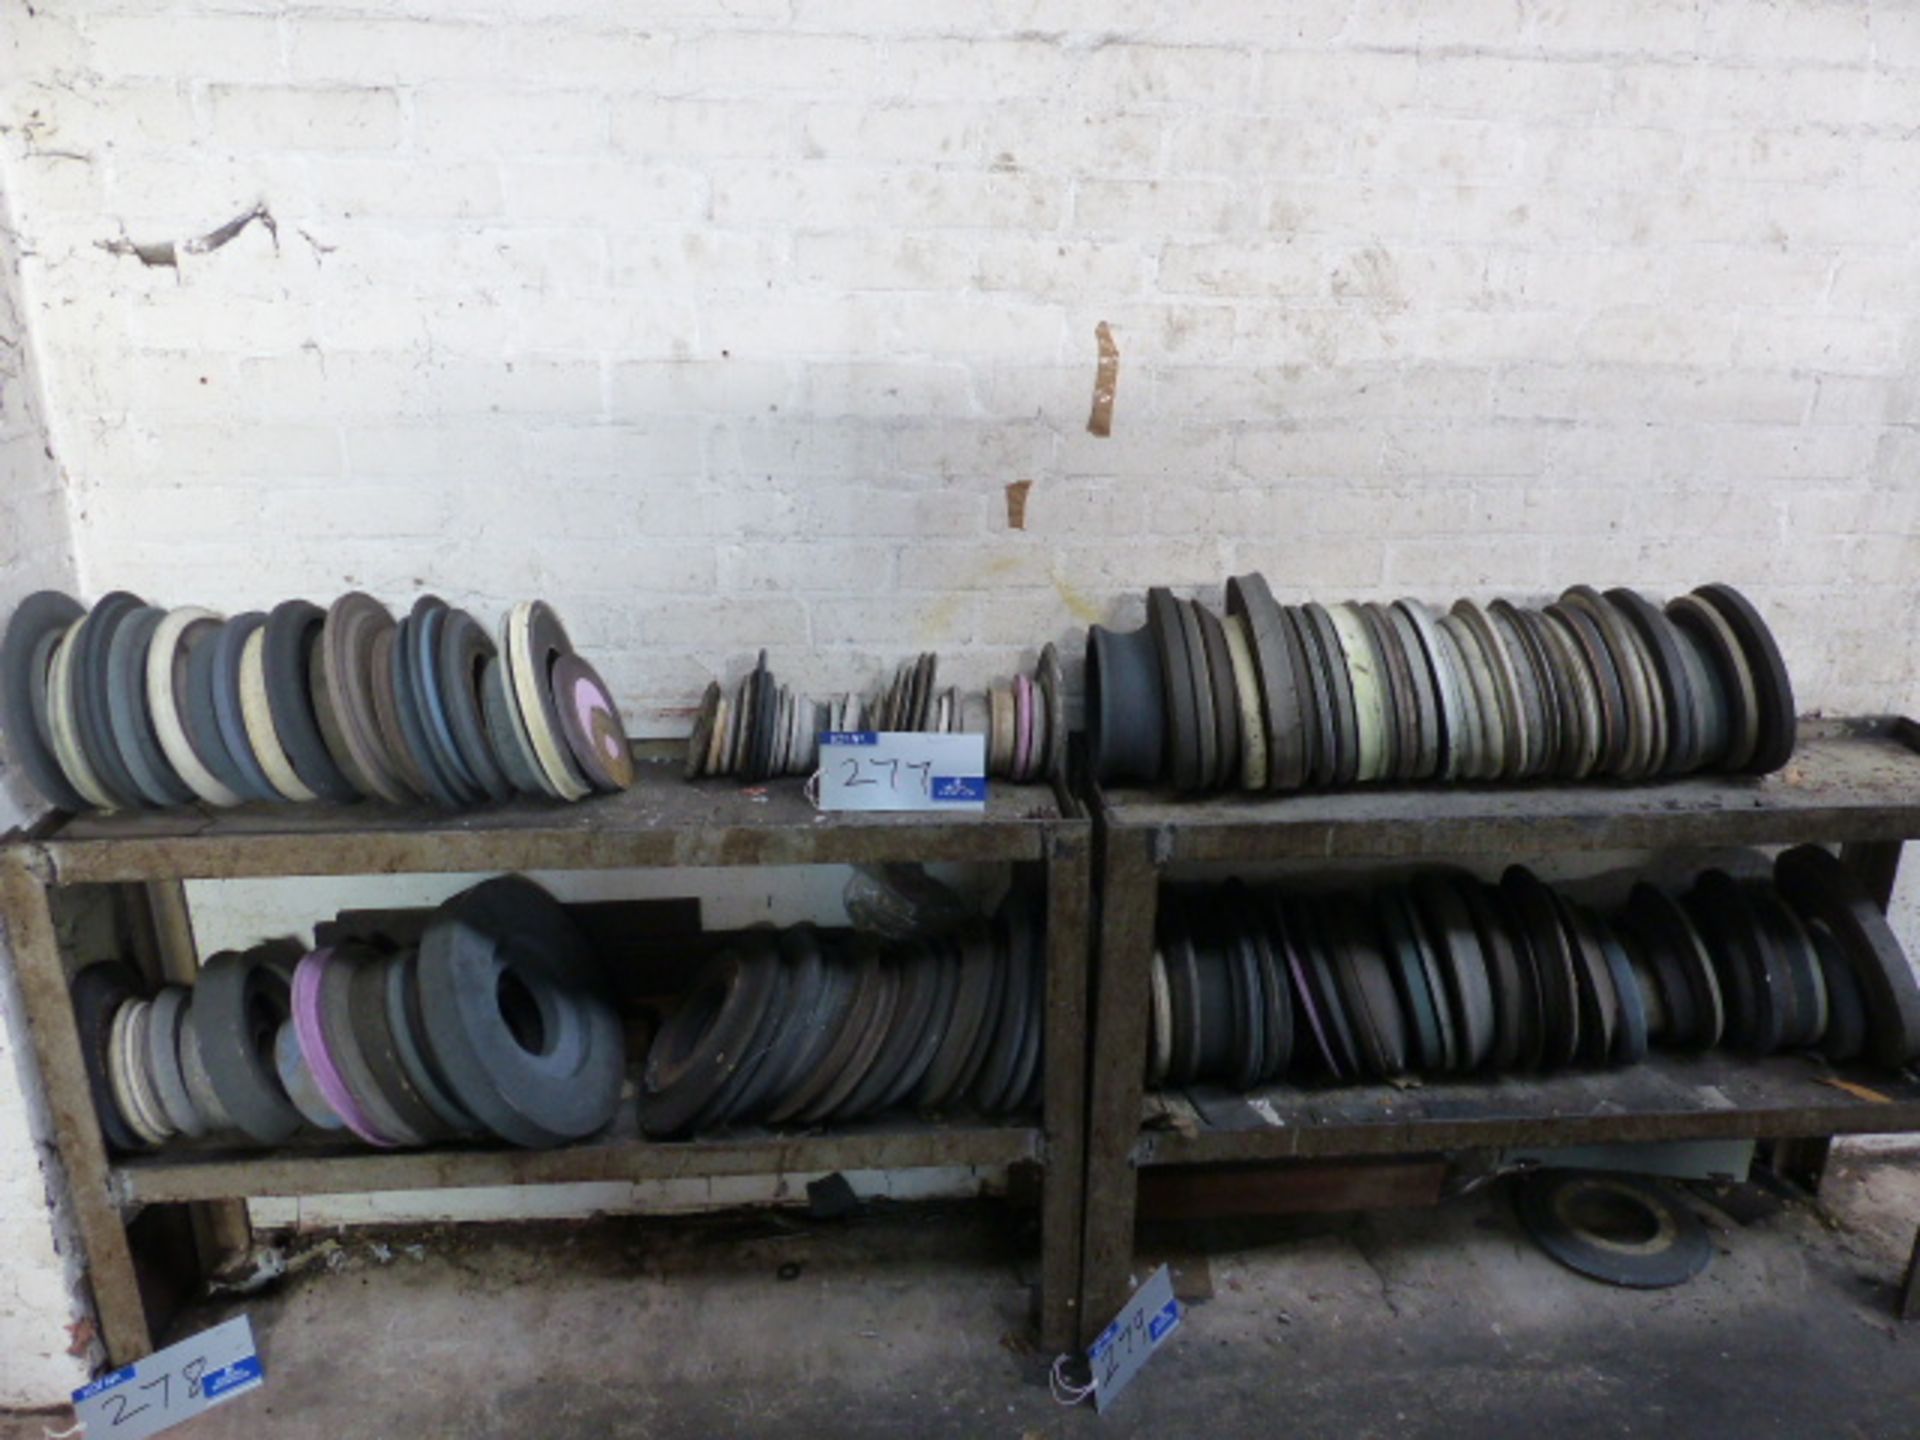 A Large Quantity of Used Grinding Wheels.